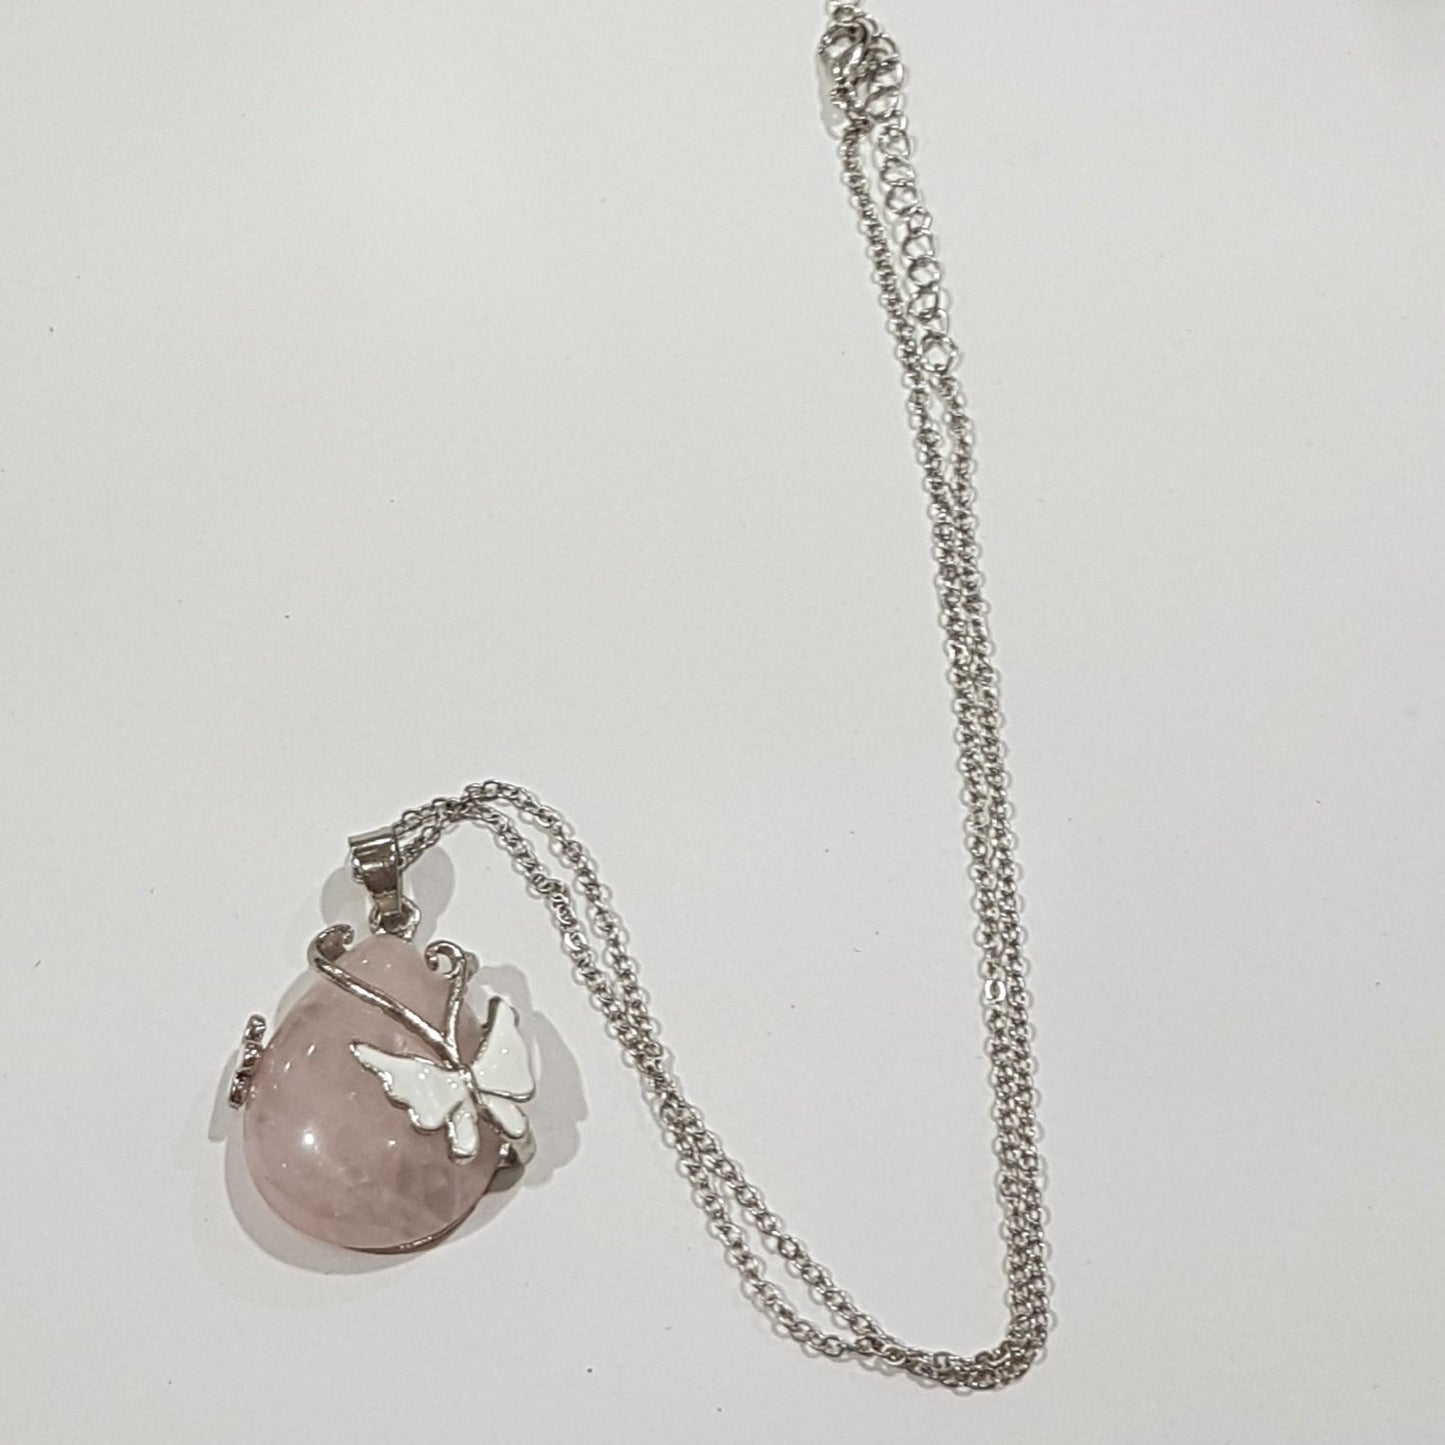 Oval Rose Quartz Necklace With White Butterflies